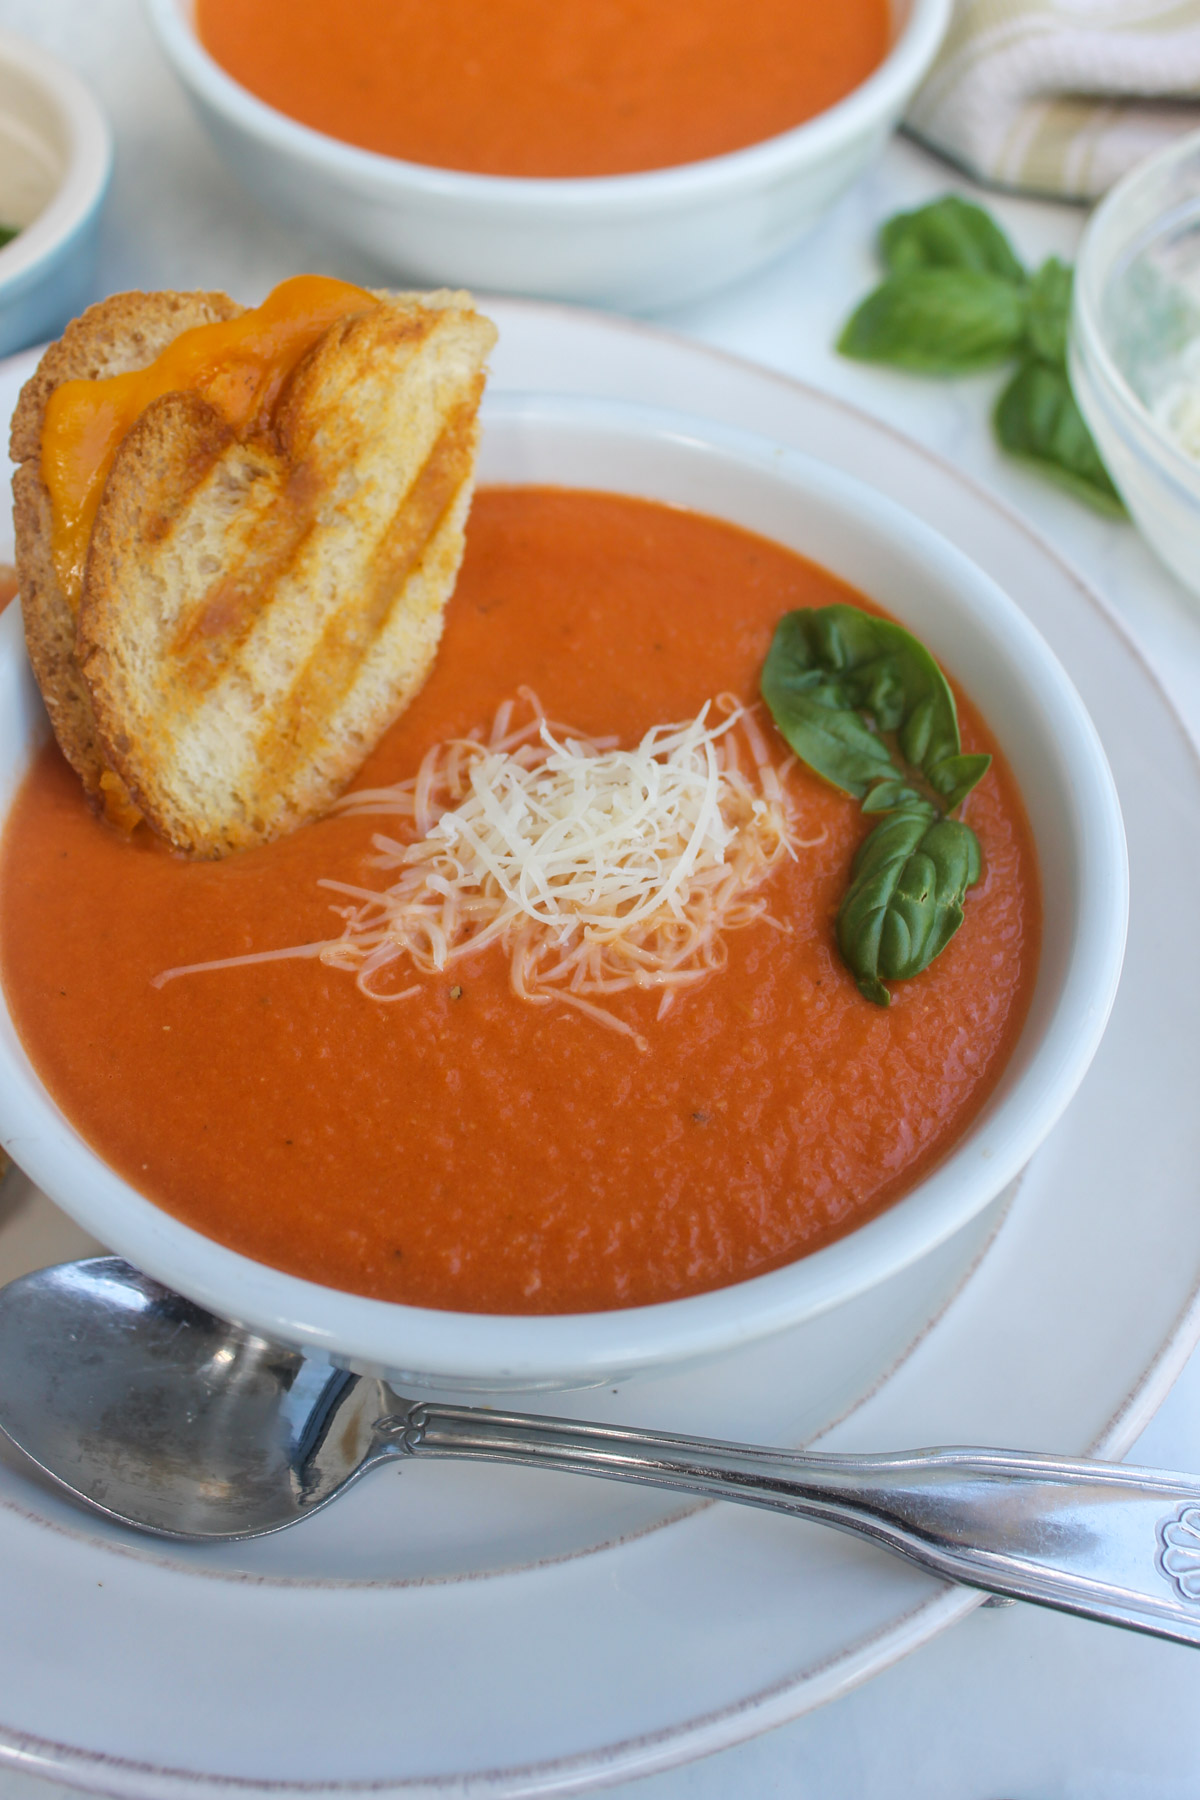 A bowl of Protein Tomato Soup with a grilled cheese sandwich dunked in it.